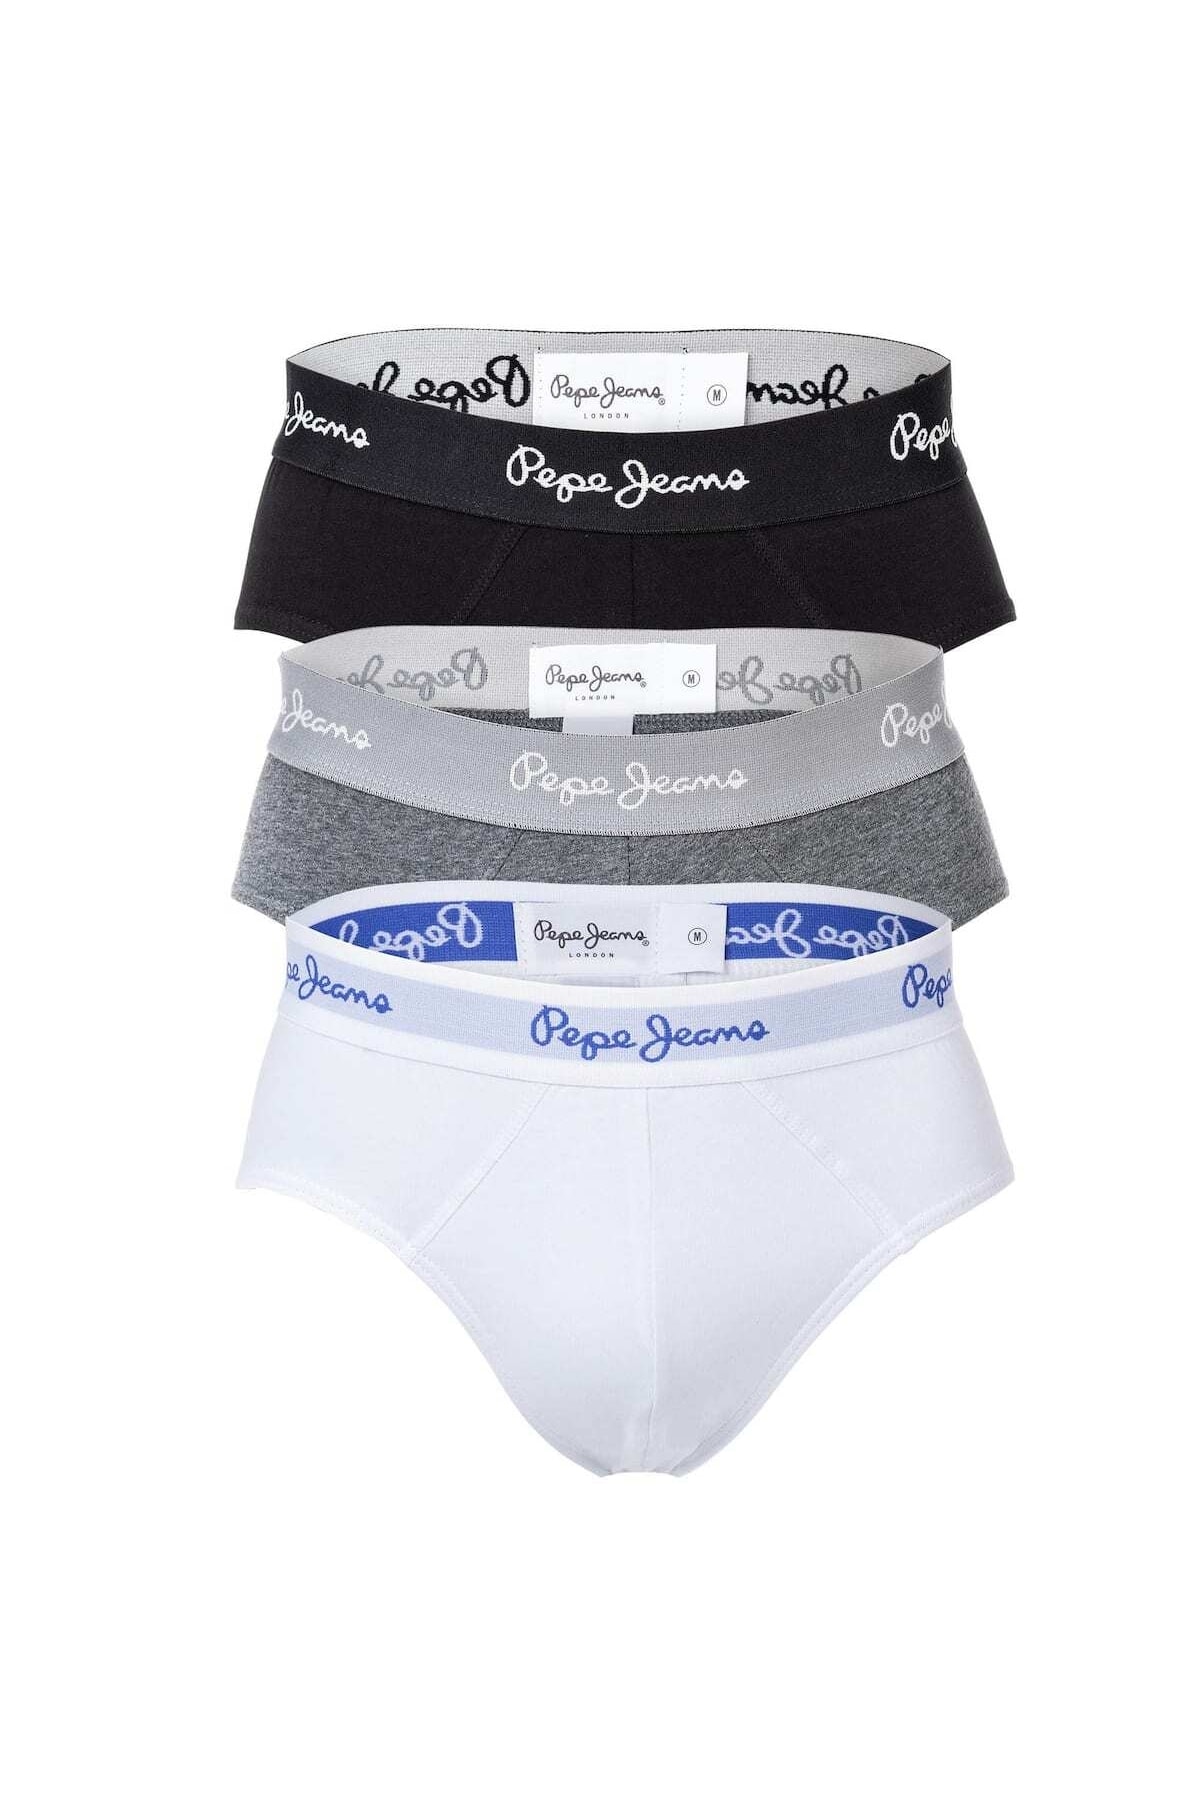 Top more than 147 pepe jeans undergarments